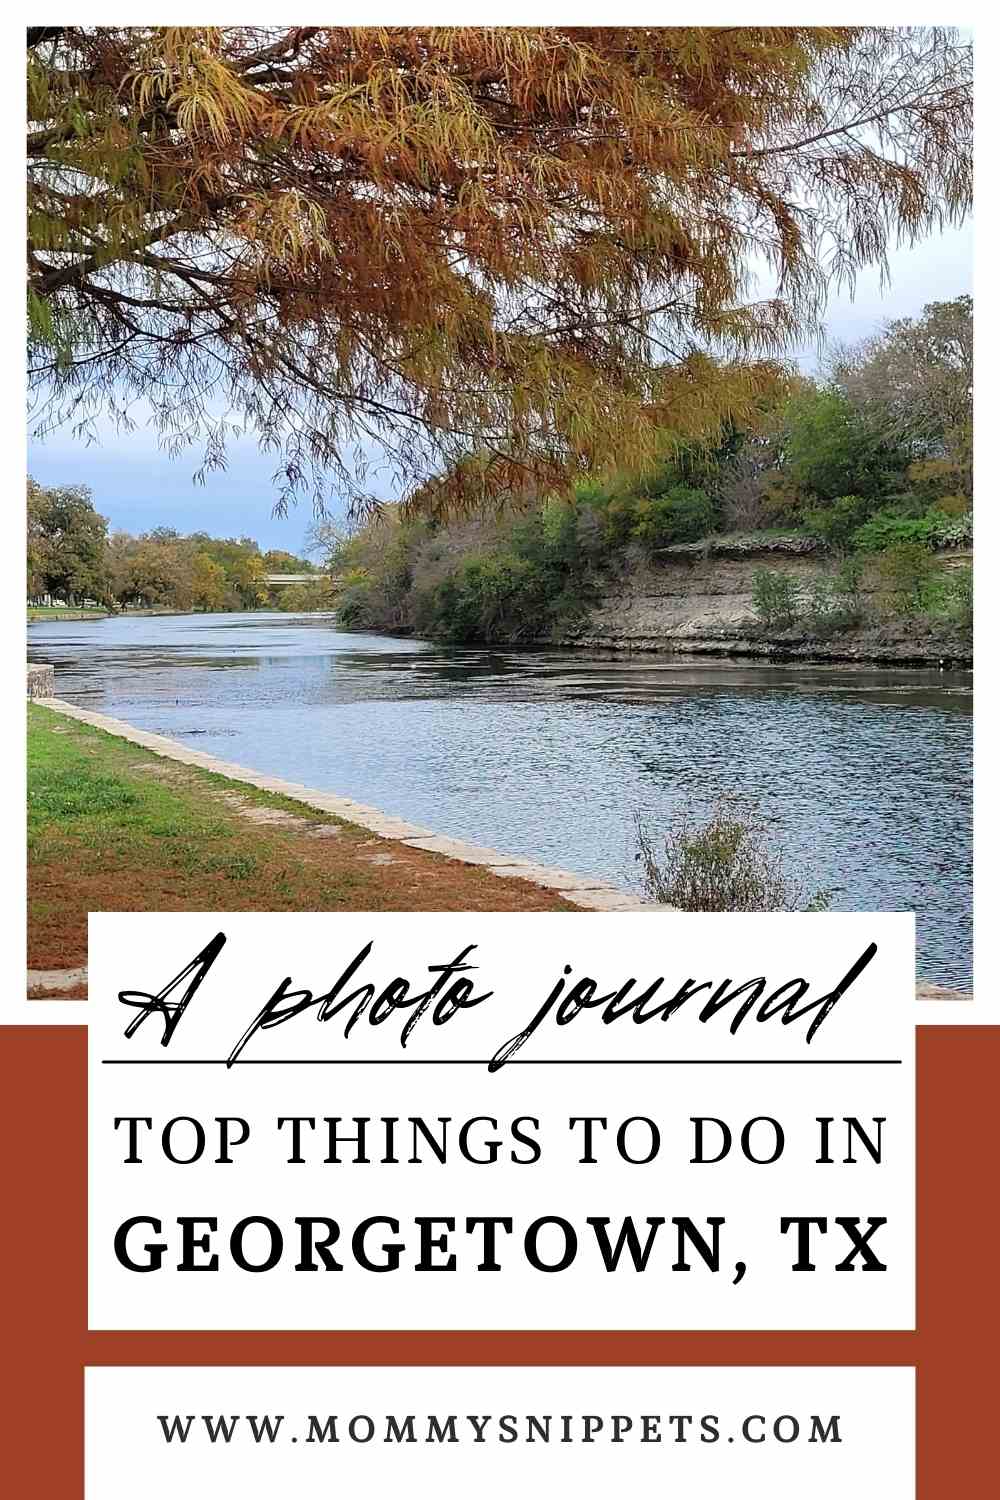 Top Things To Do In Georgetown TX - A Photo Journal